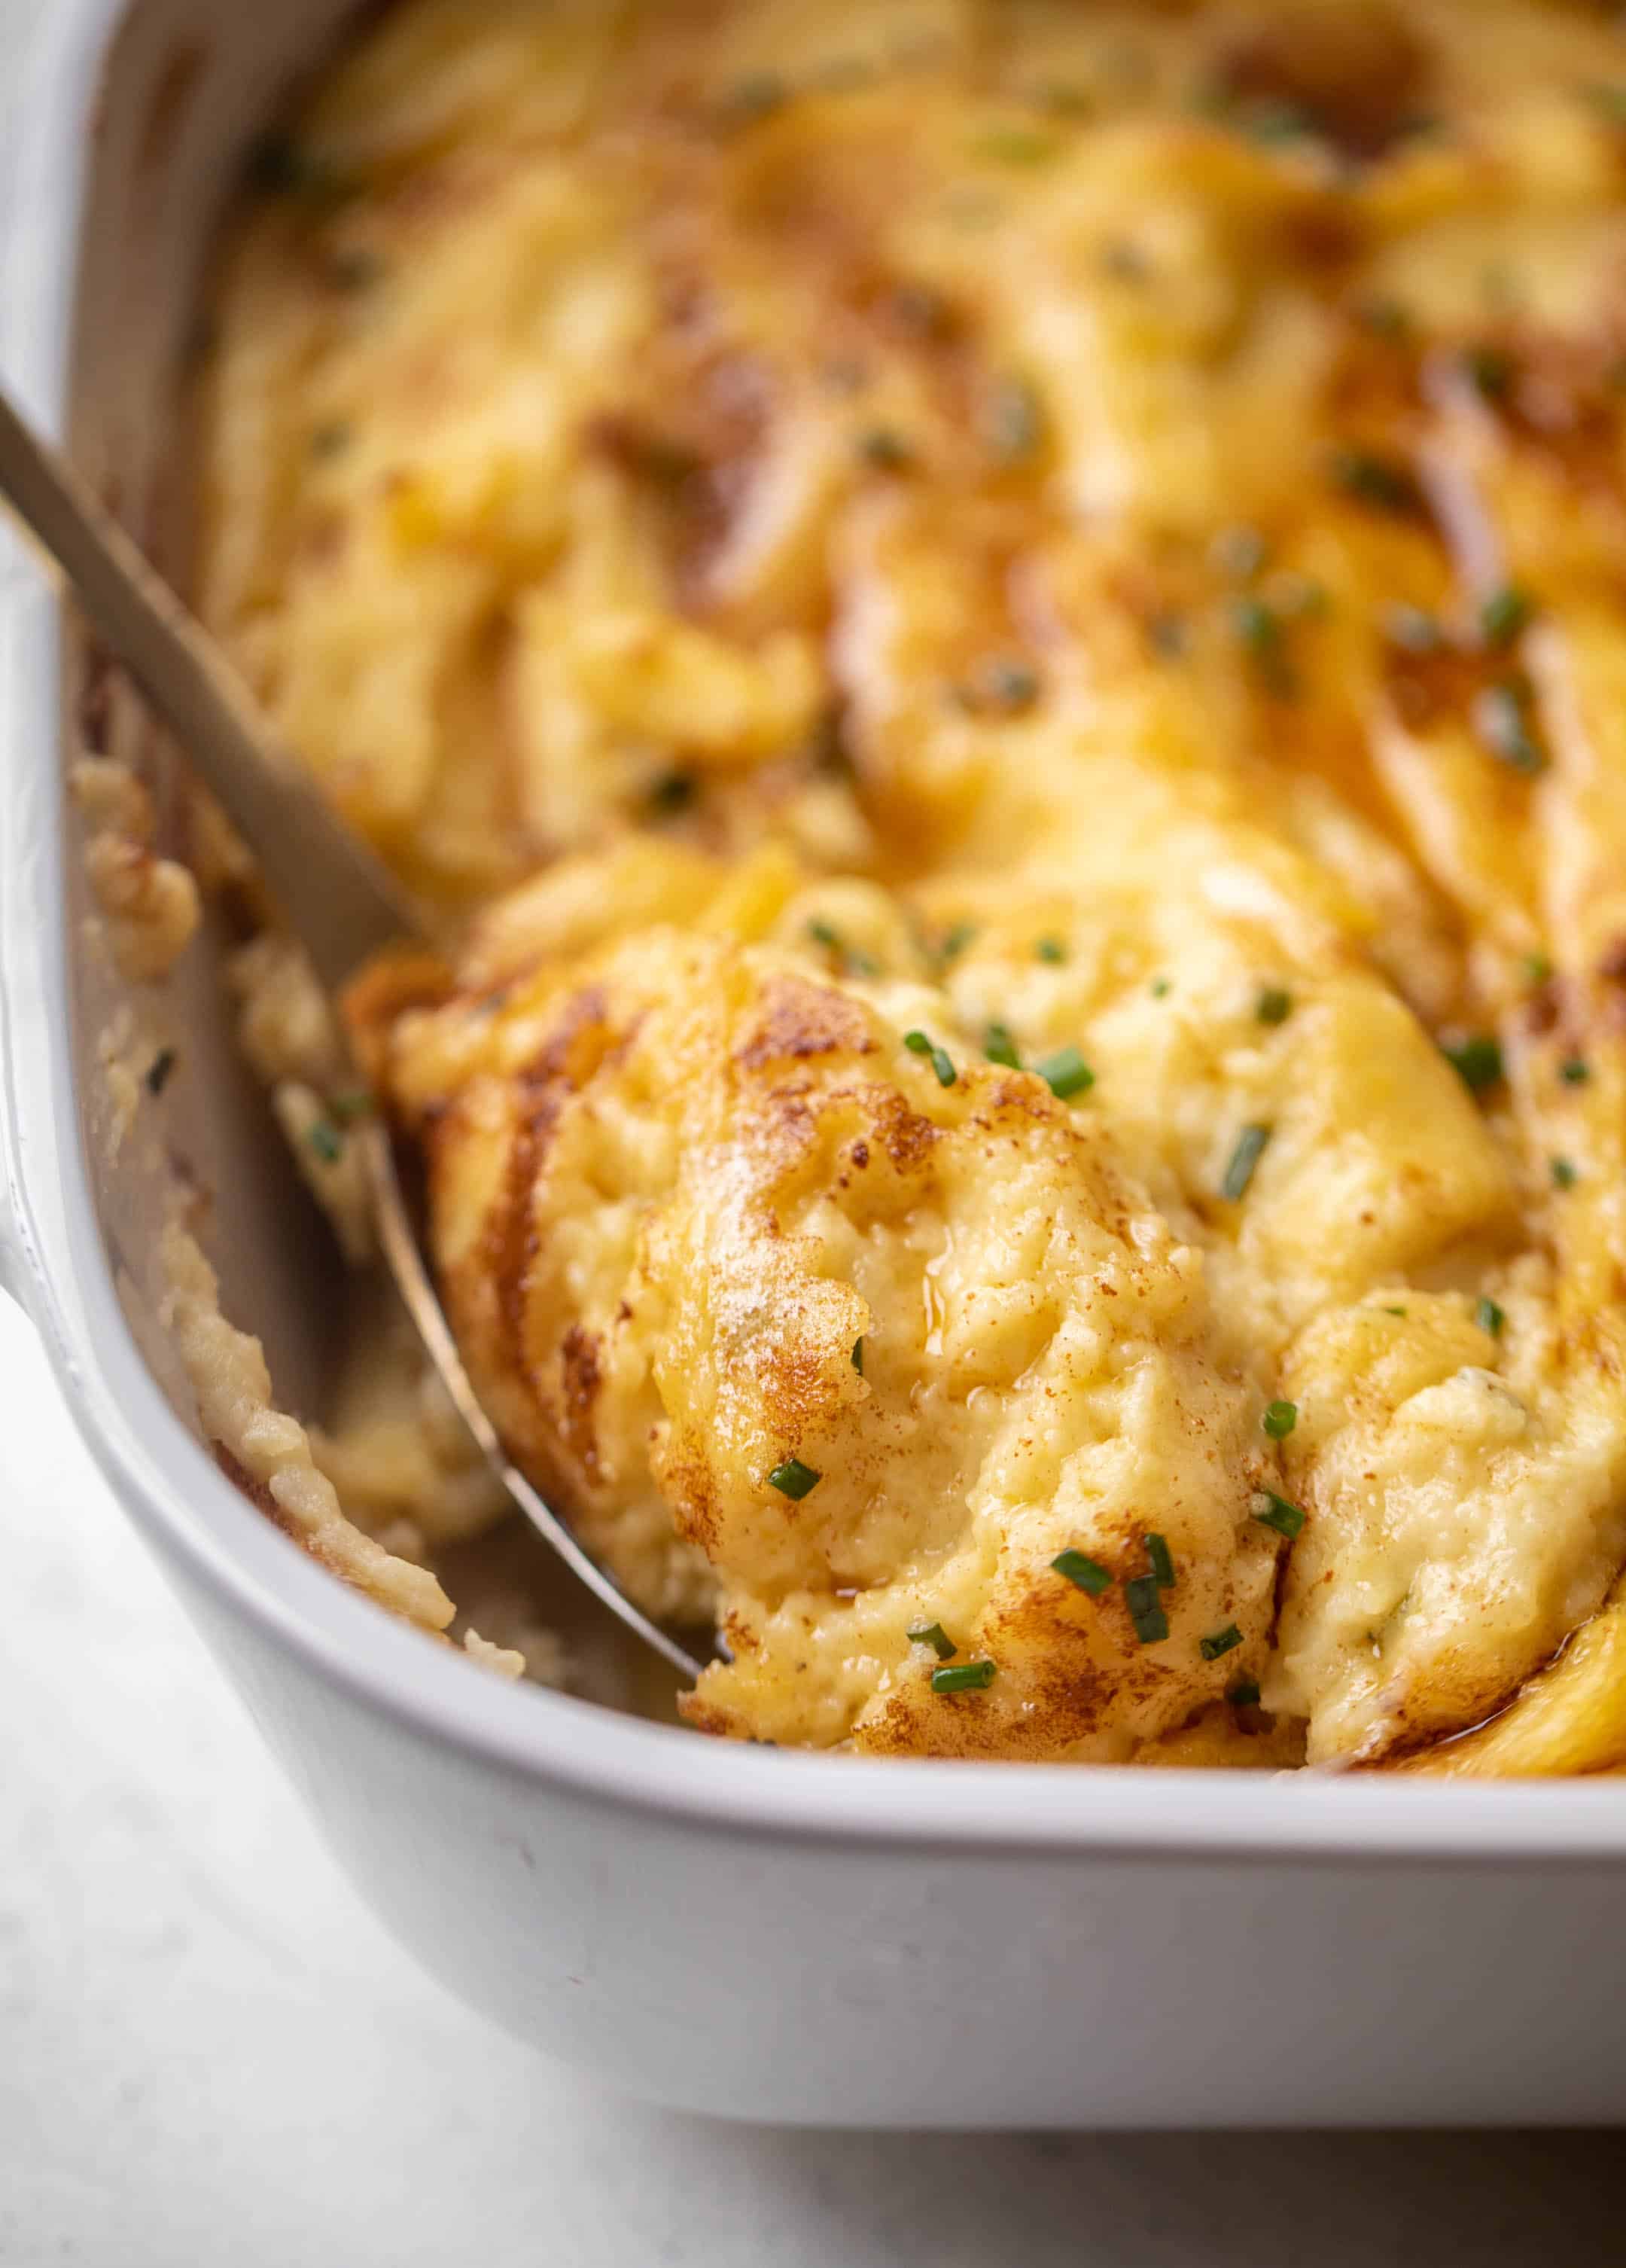 Mashed Potato Bake - Brown Butter and Herb Mashed Potatoes